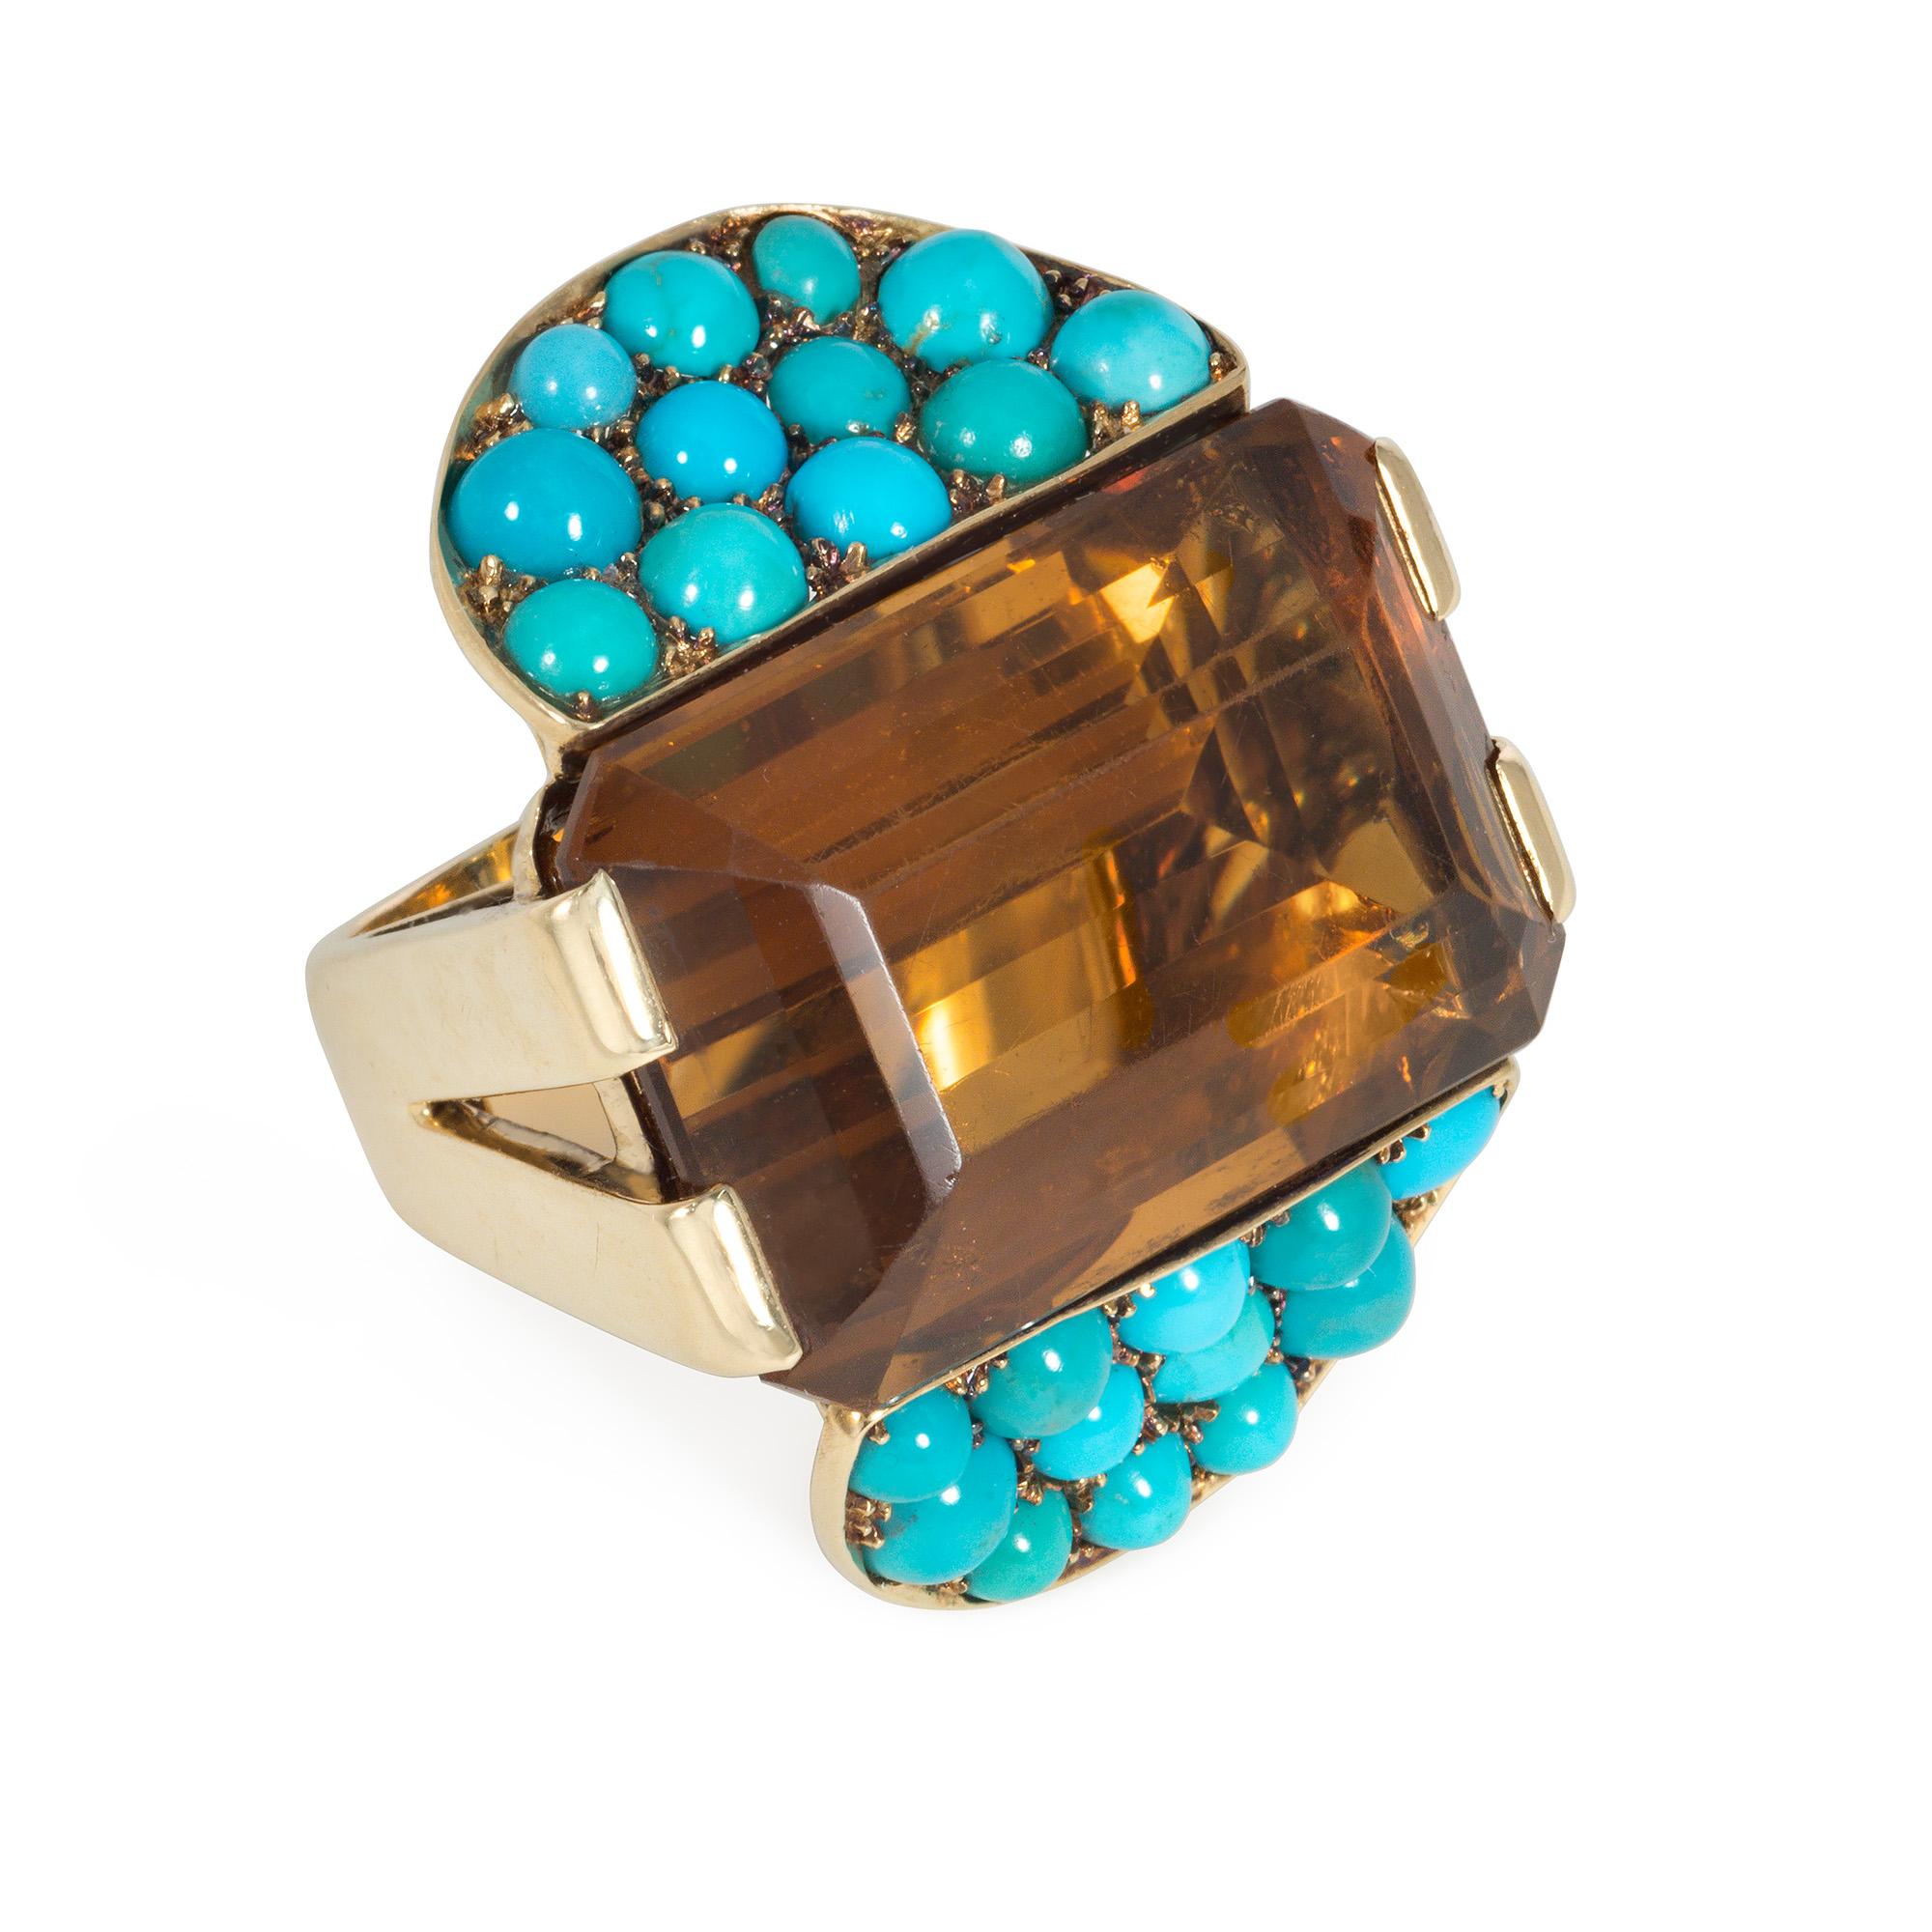 An oversized Retro gold, citrine, and turquoise cocktail ring comprised of a large emerald-cut citrine set horizontally and vertically flanked by two demi-lune angled panels of pavé turquoise, in 14k.  Atw citrine 35.00 cts.  Face up dimensions: 1